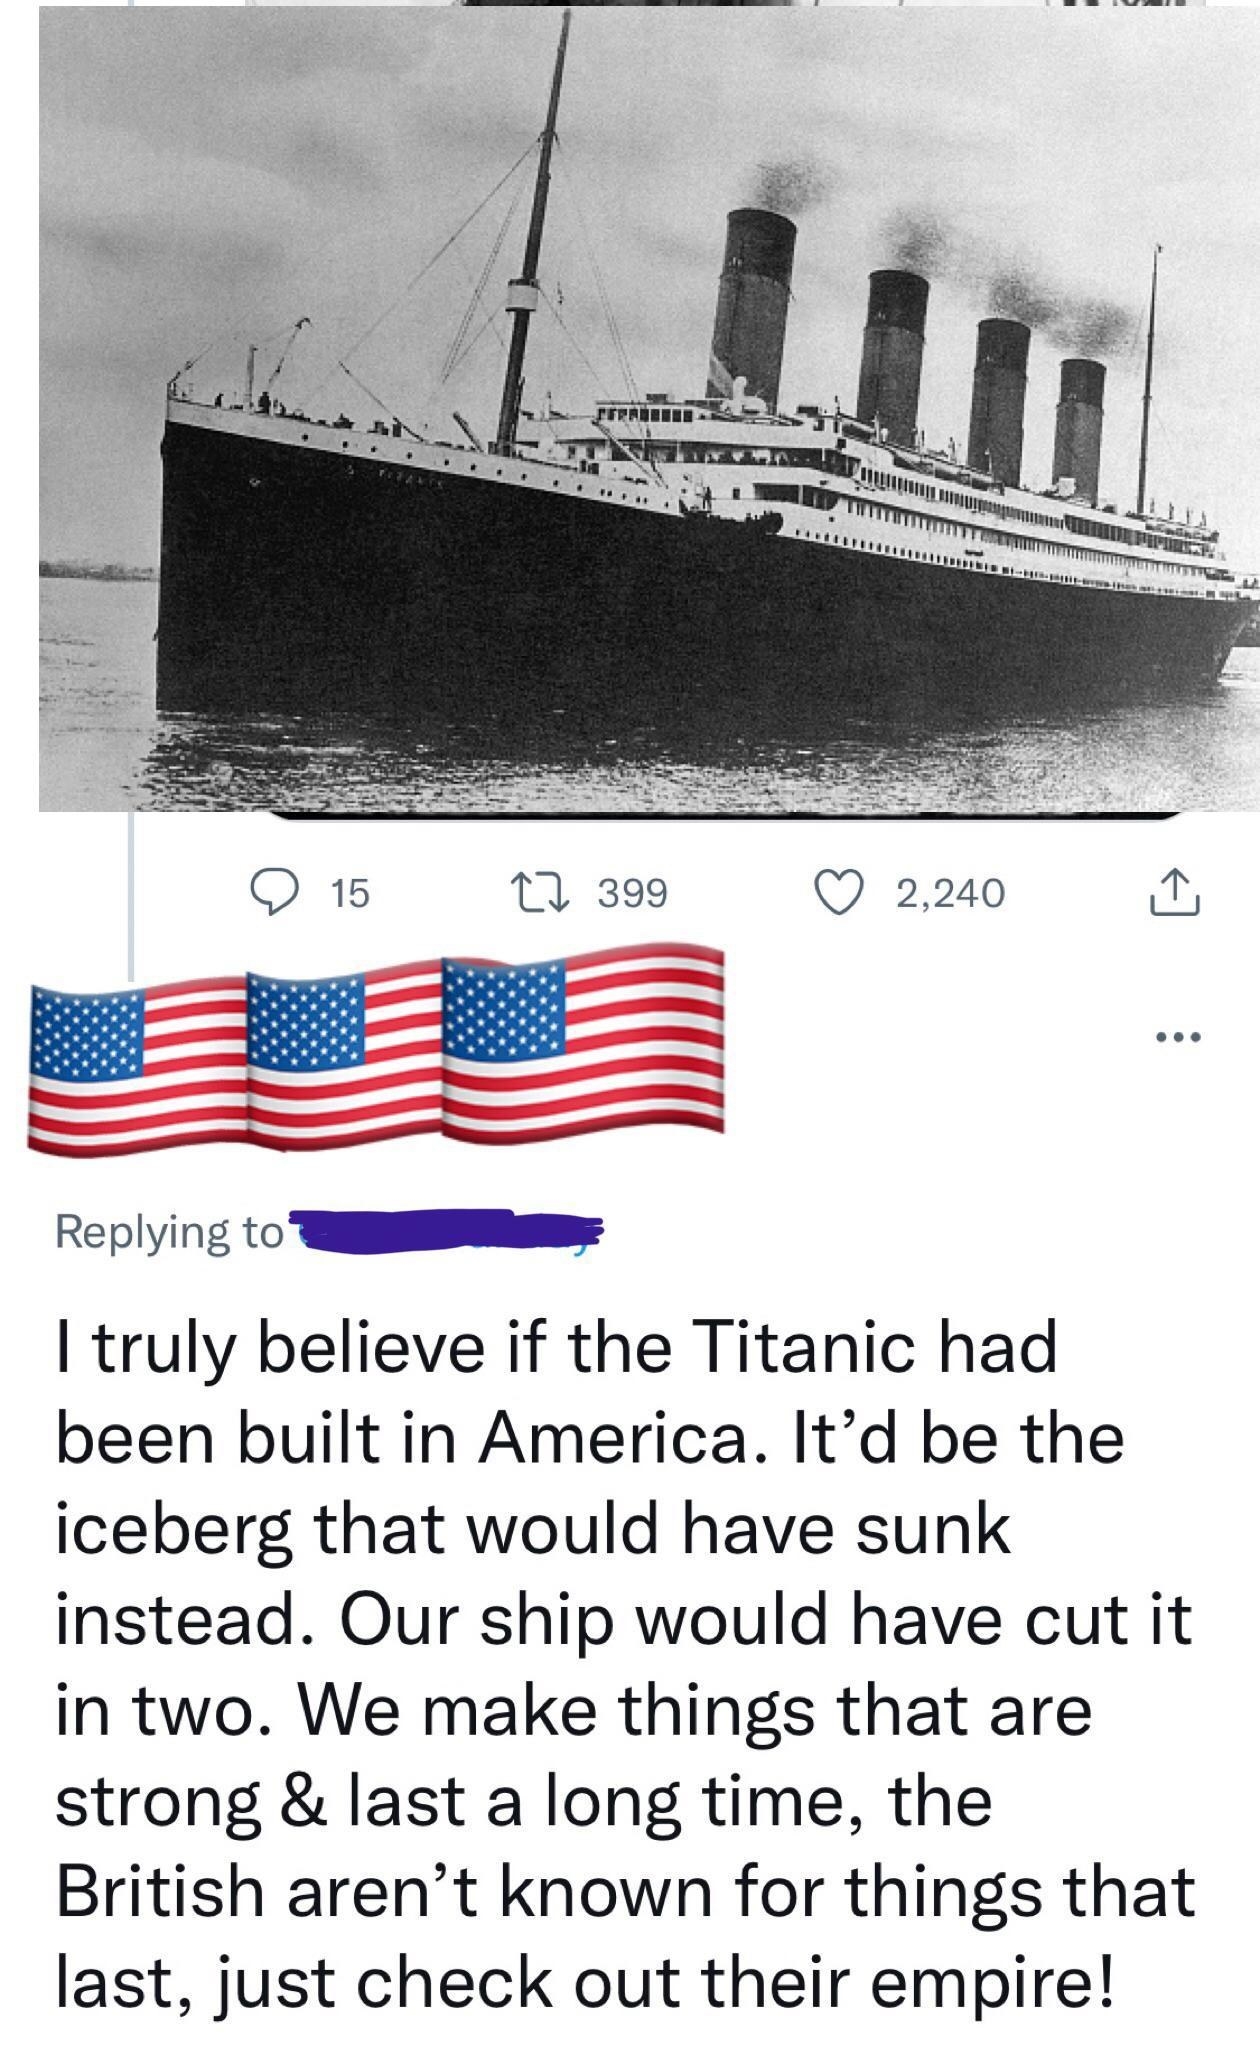 american who says that if the titanic were built in america it would not have sunk